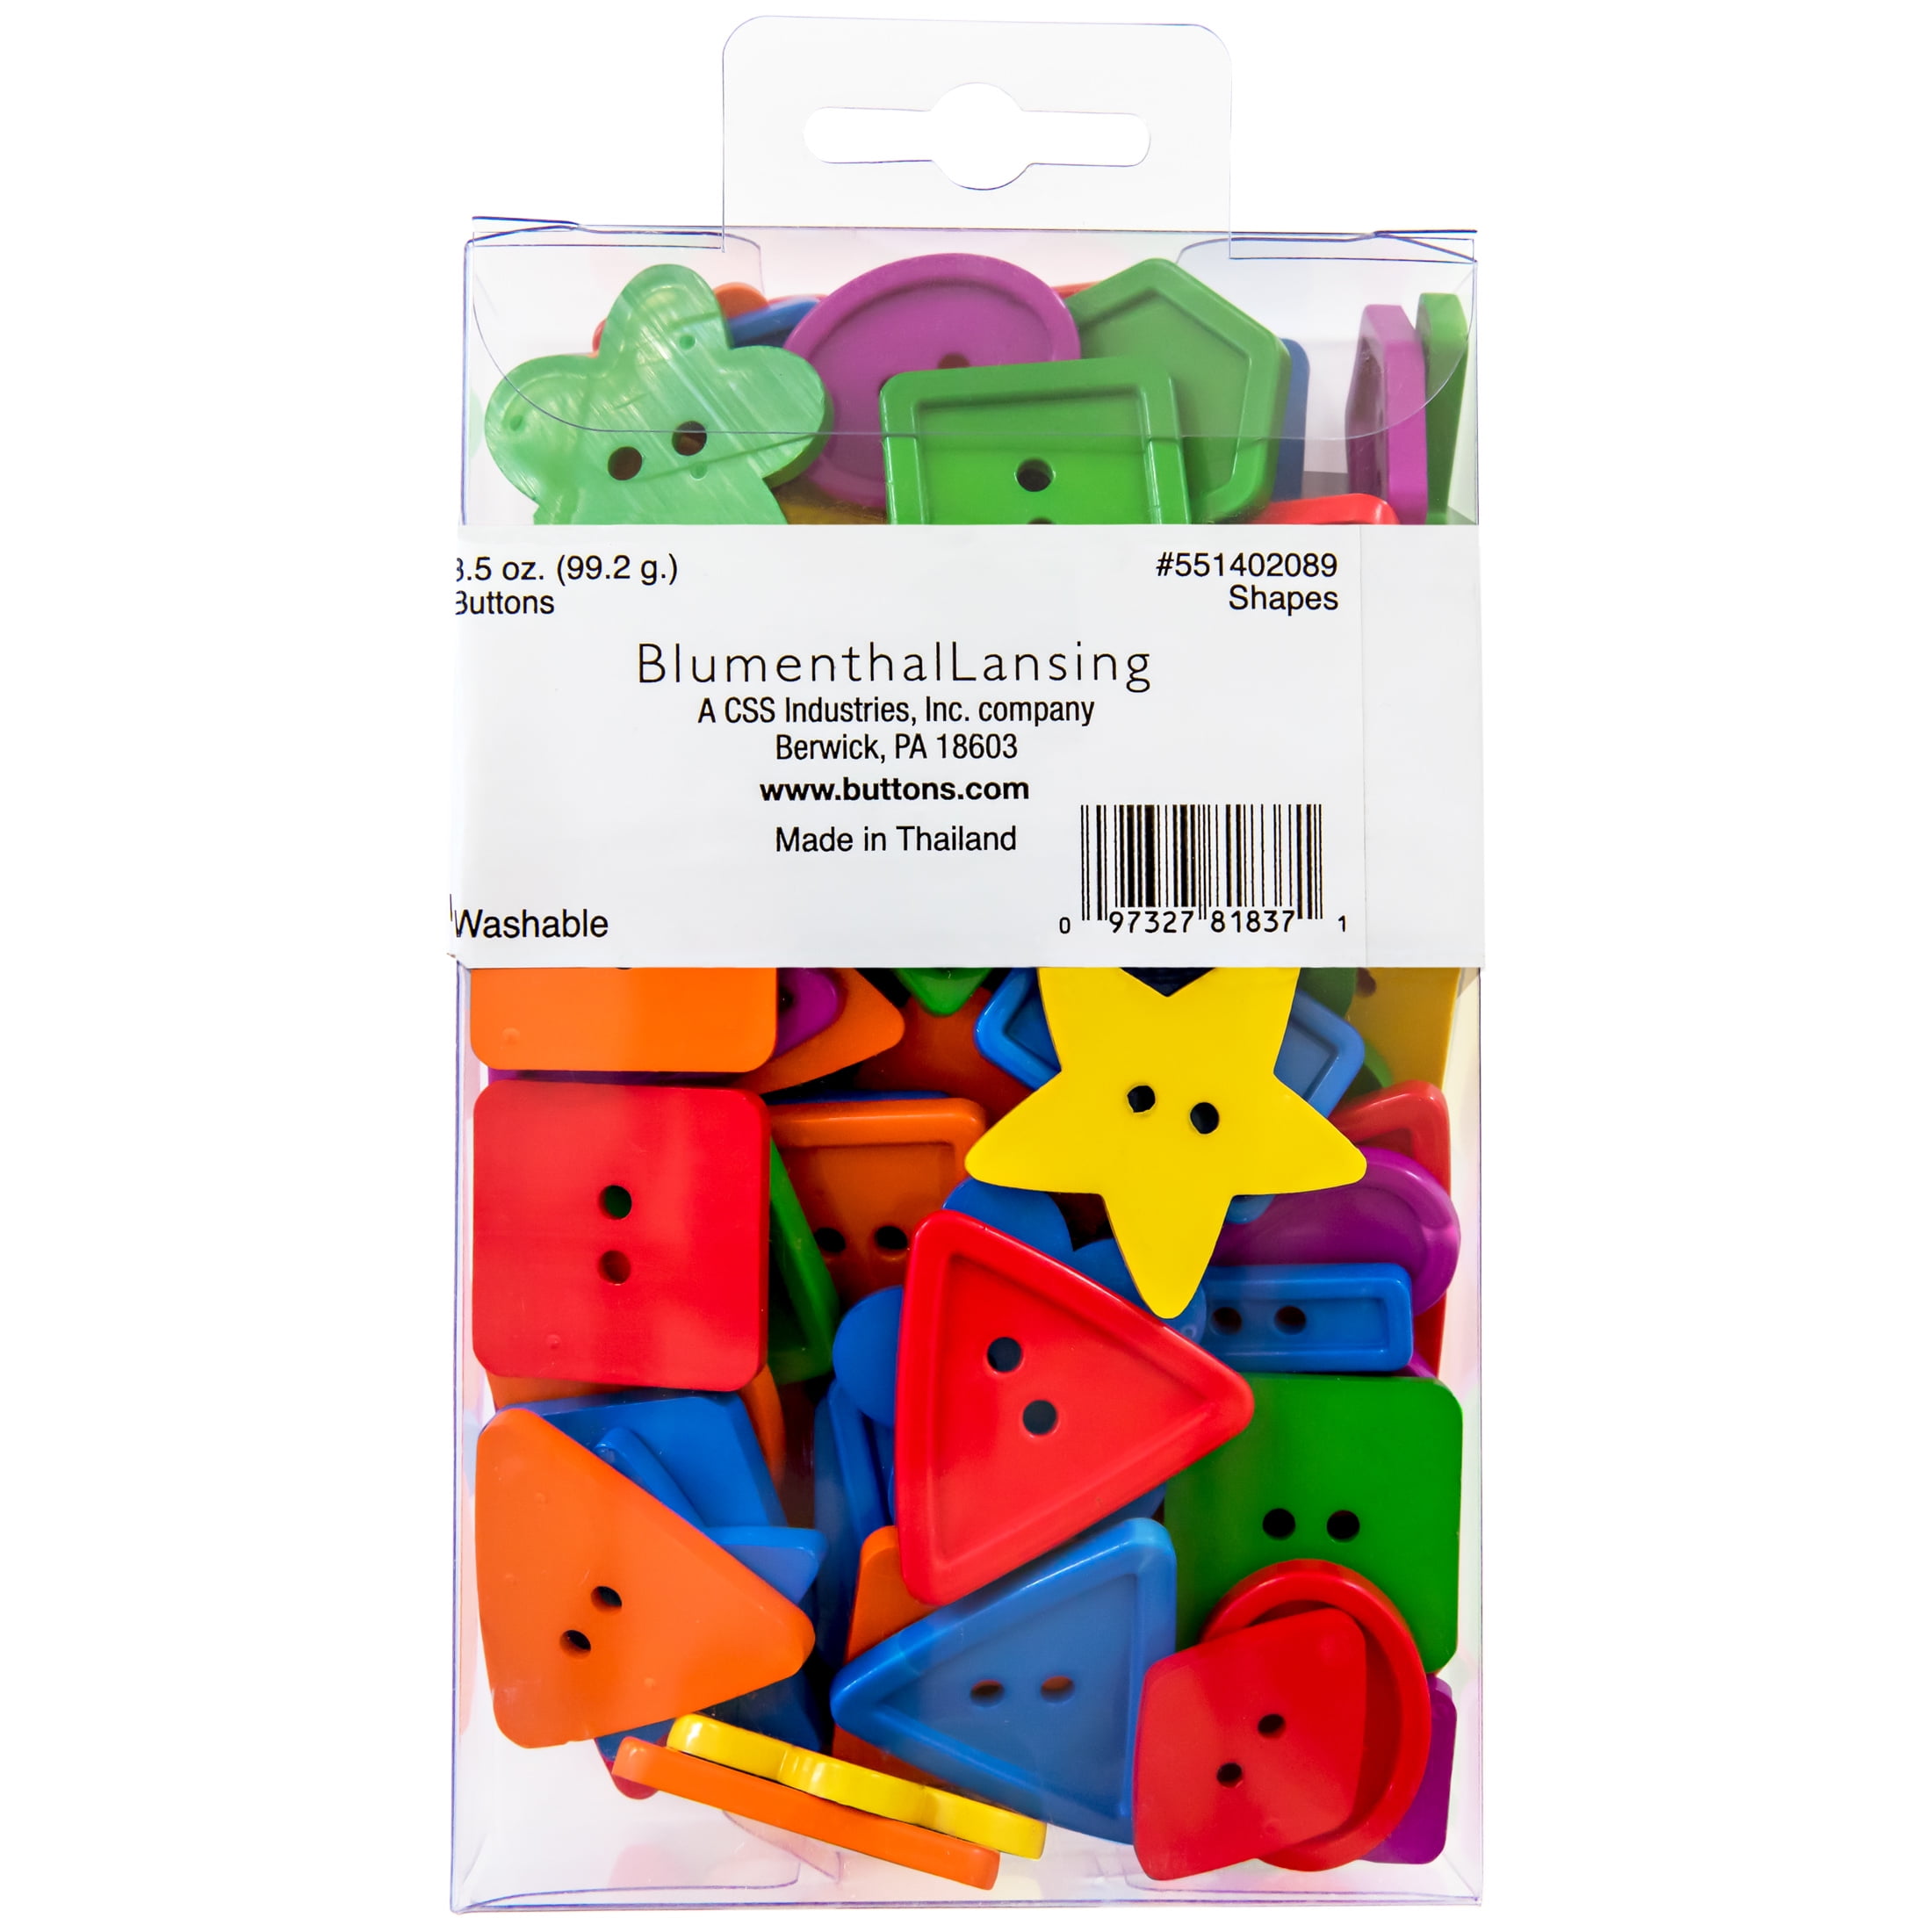 Favorite Findings Value Red Assorted Sew Thru & Shank Buttons, 4